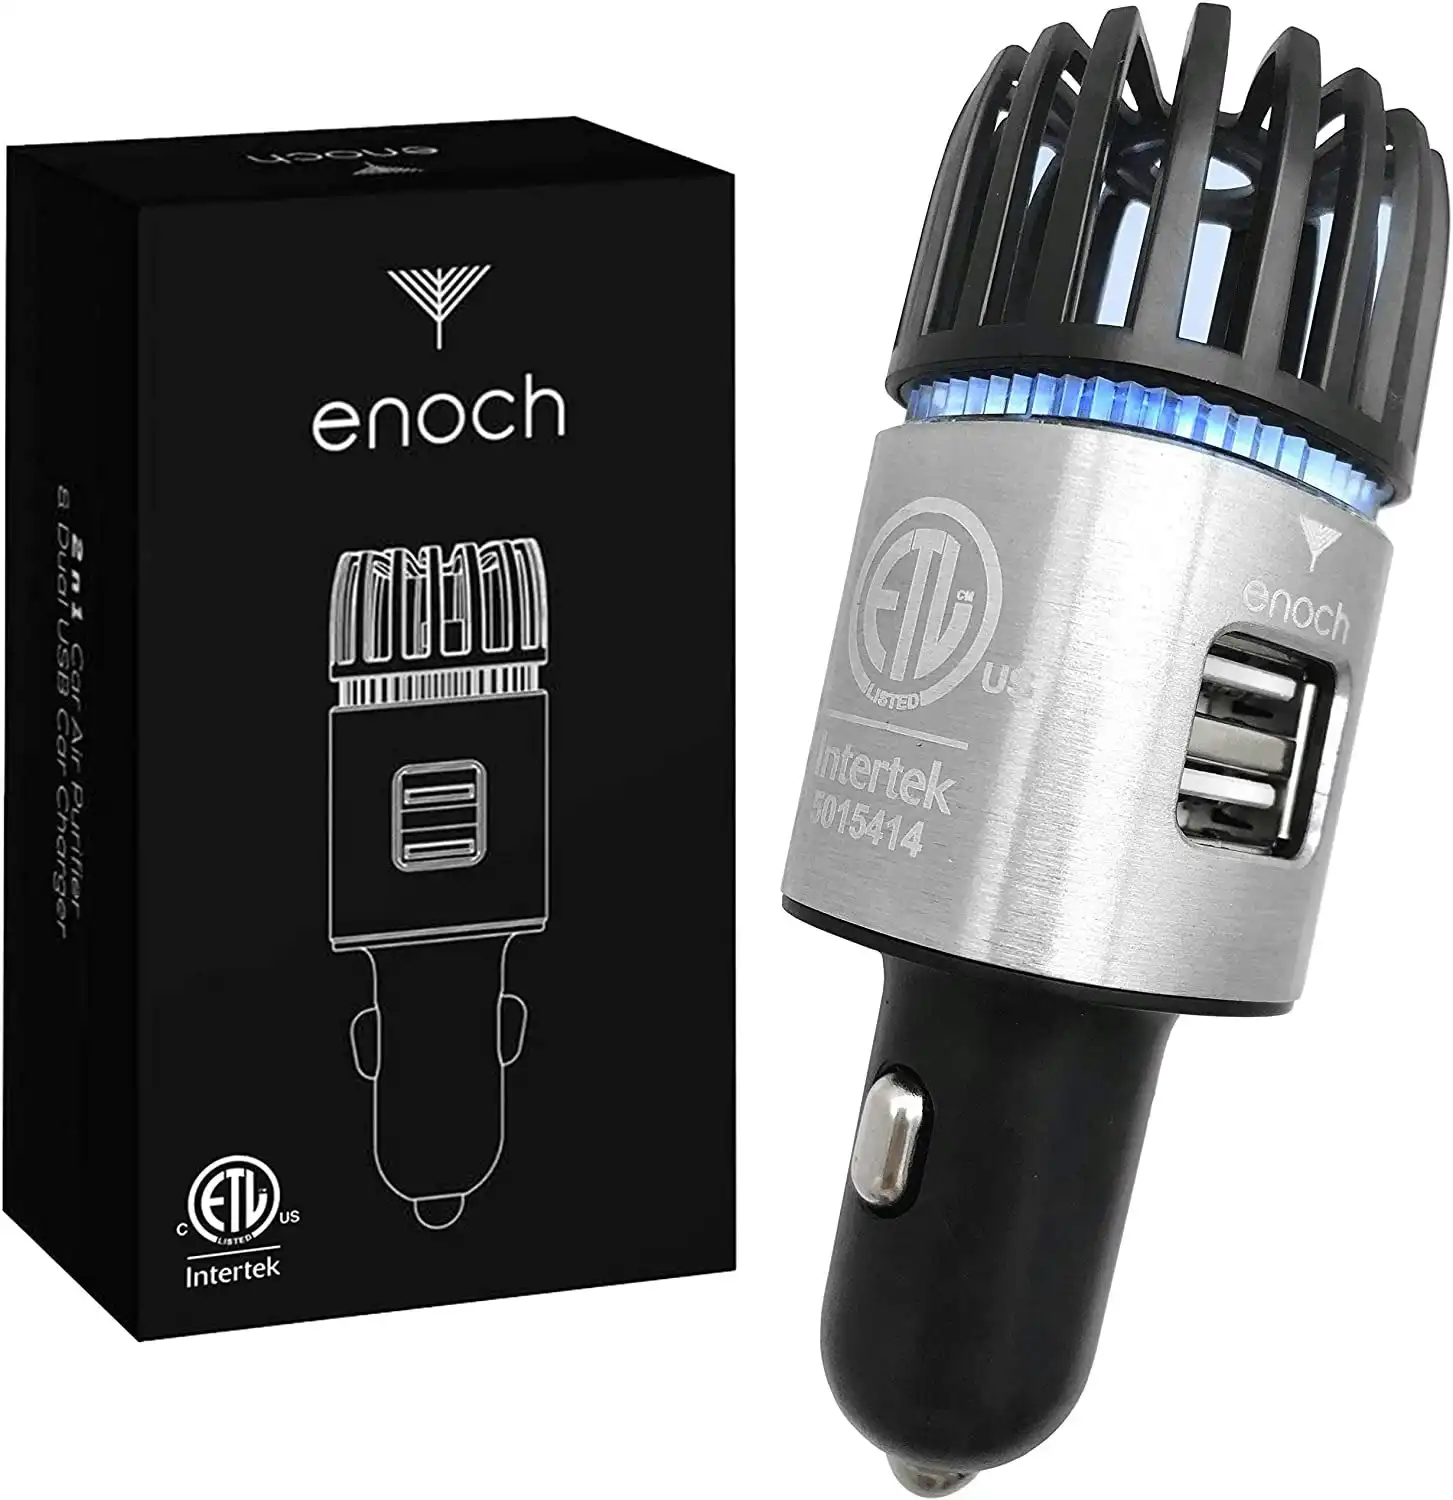 Enoch Car Air Purifier with USB Car Charger 2-Port. Car Air Freshener Eliminate Odor, Dust, Pollen. Removes Cigarette Smoke, Pet and Food Odor, Ionic